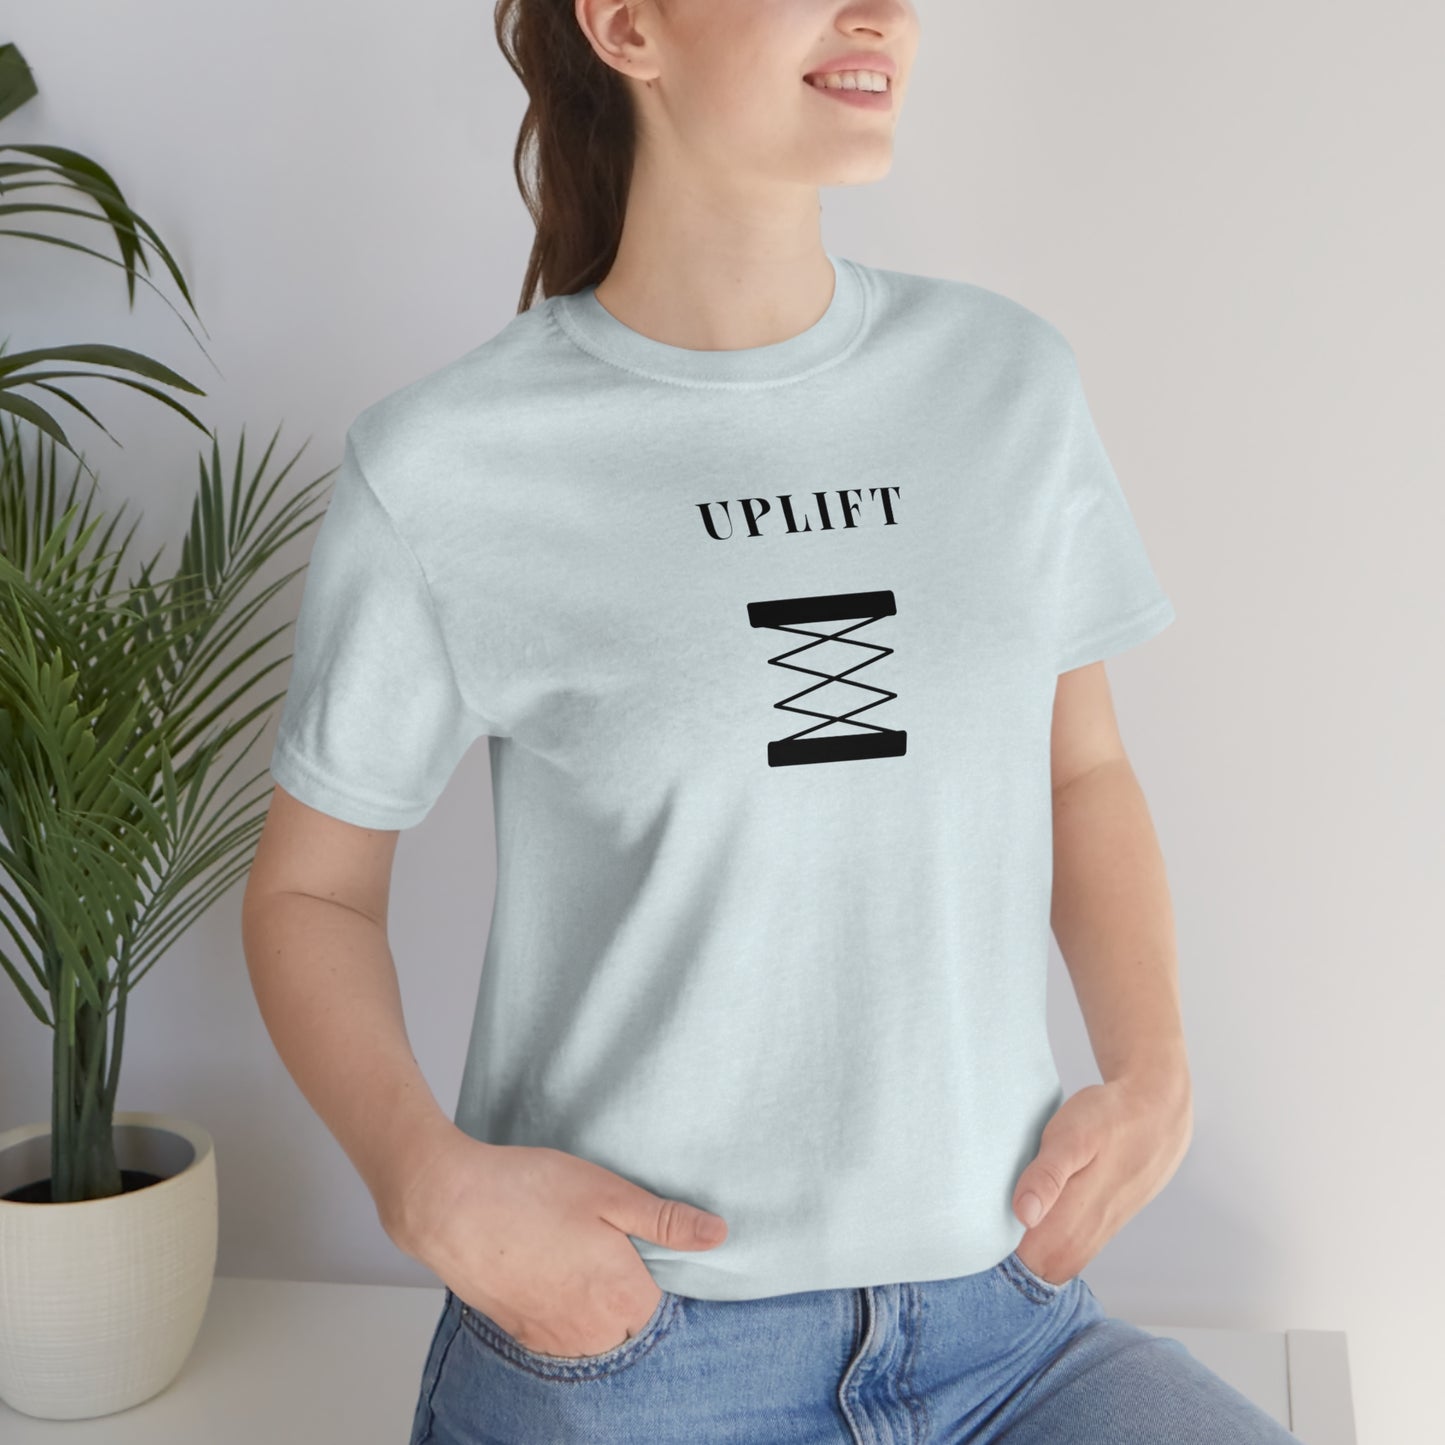 Uplift t shirt, t shirt with inspirational words, t shirt word encourages, tshirt gift for friends and family